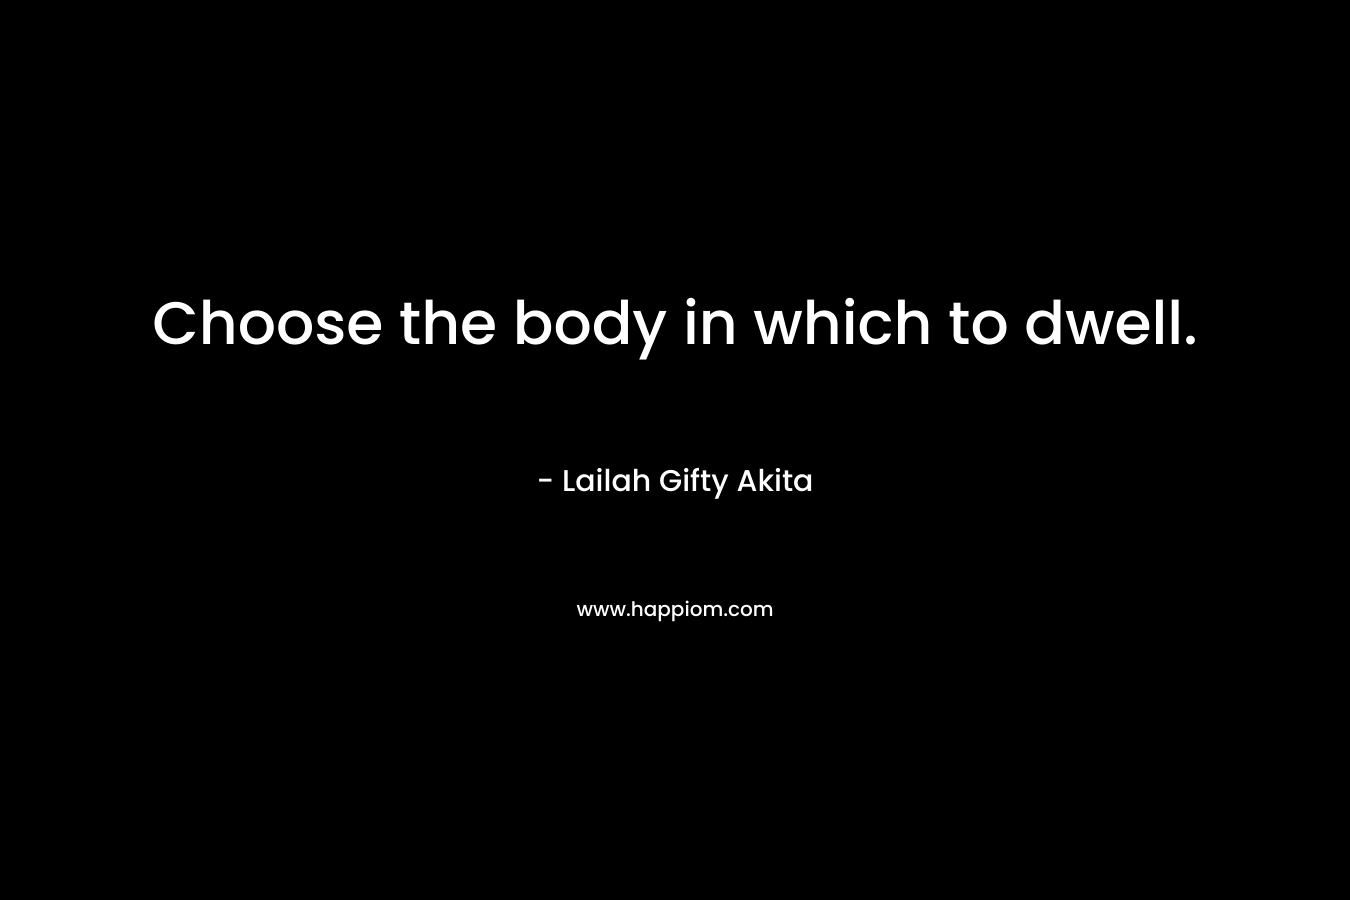 Choose the body in which to dwell.